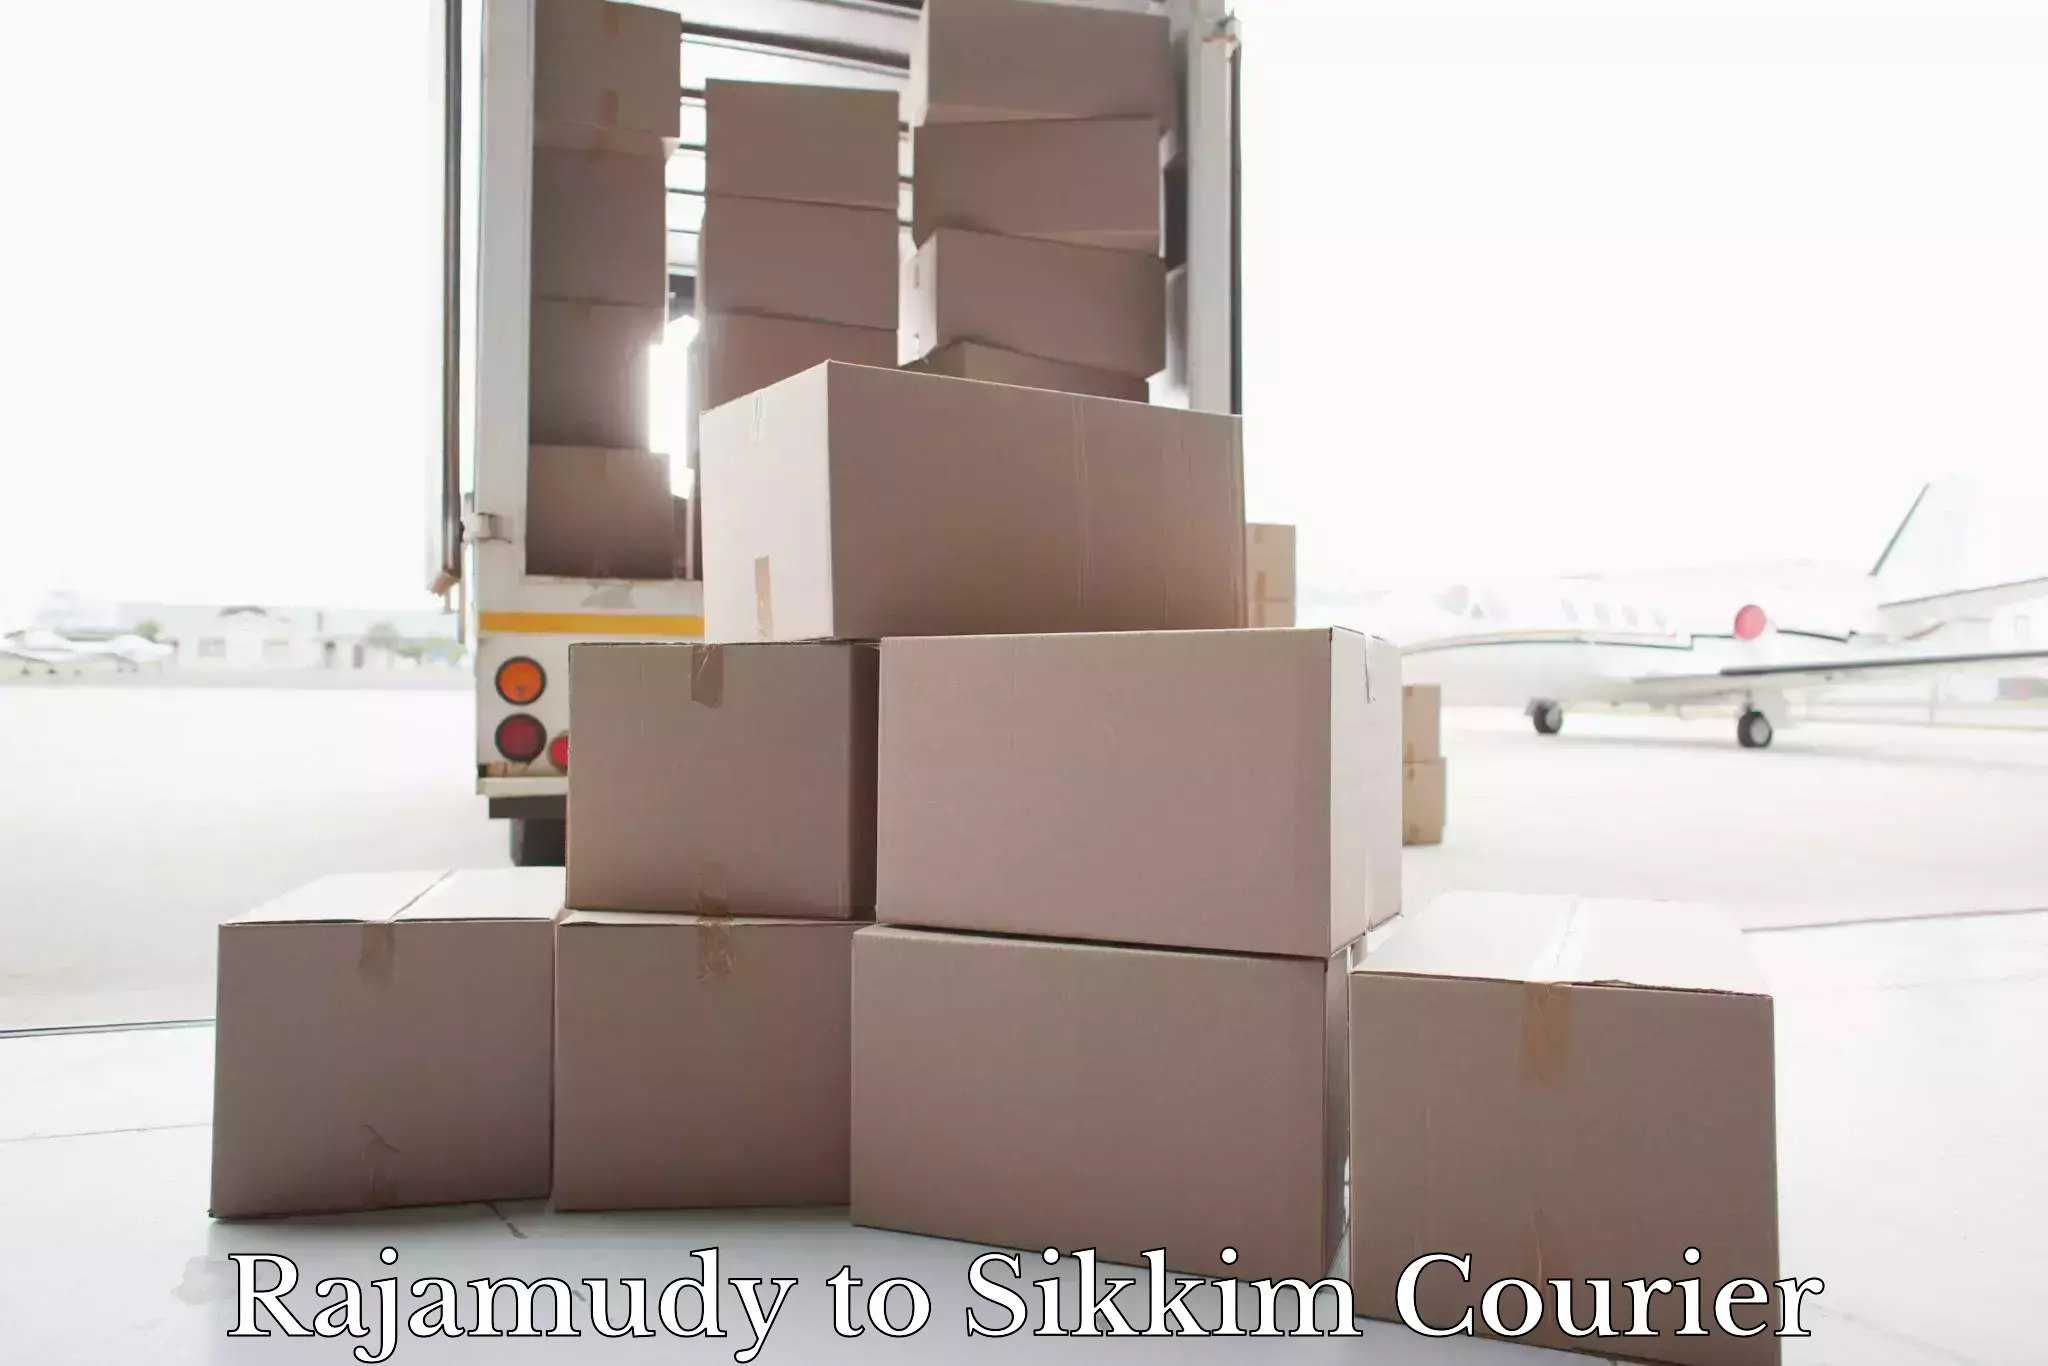 Baggage delivery scheduling Rajamudy to Sikkim